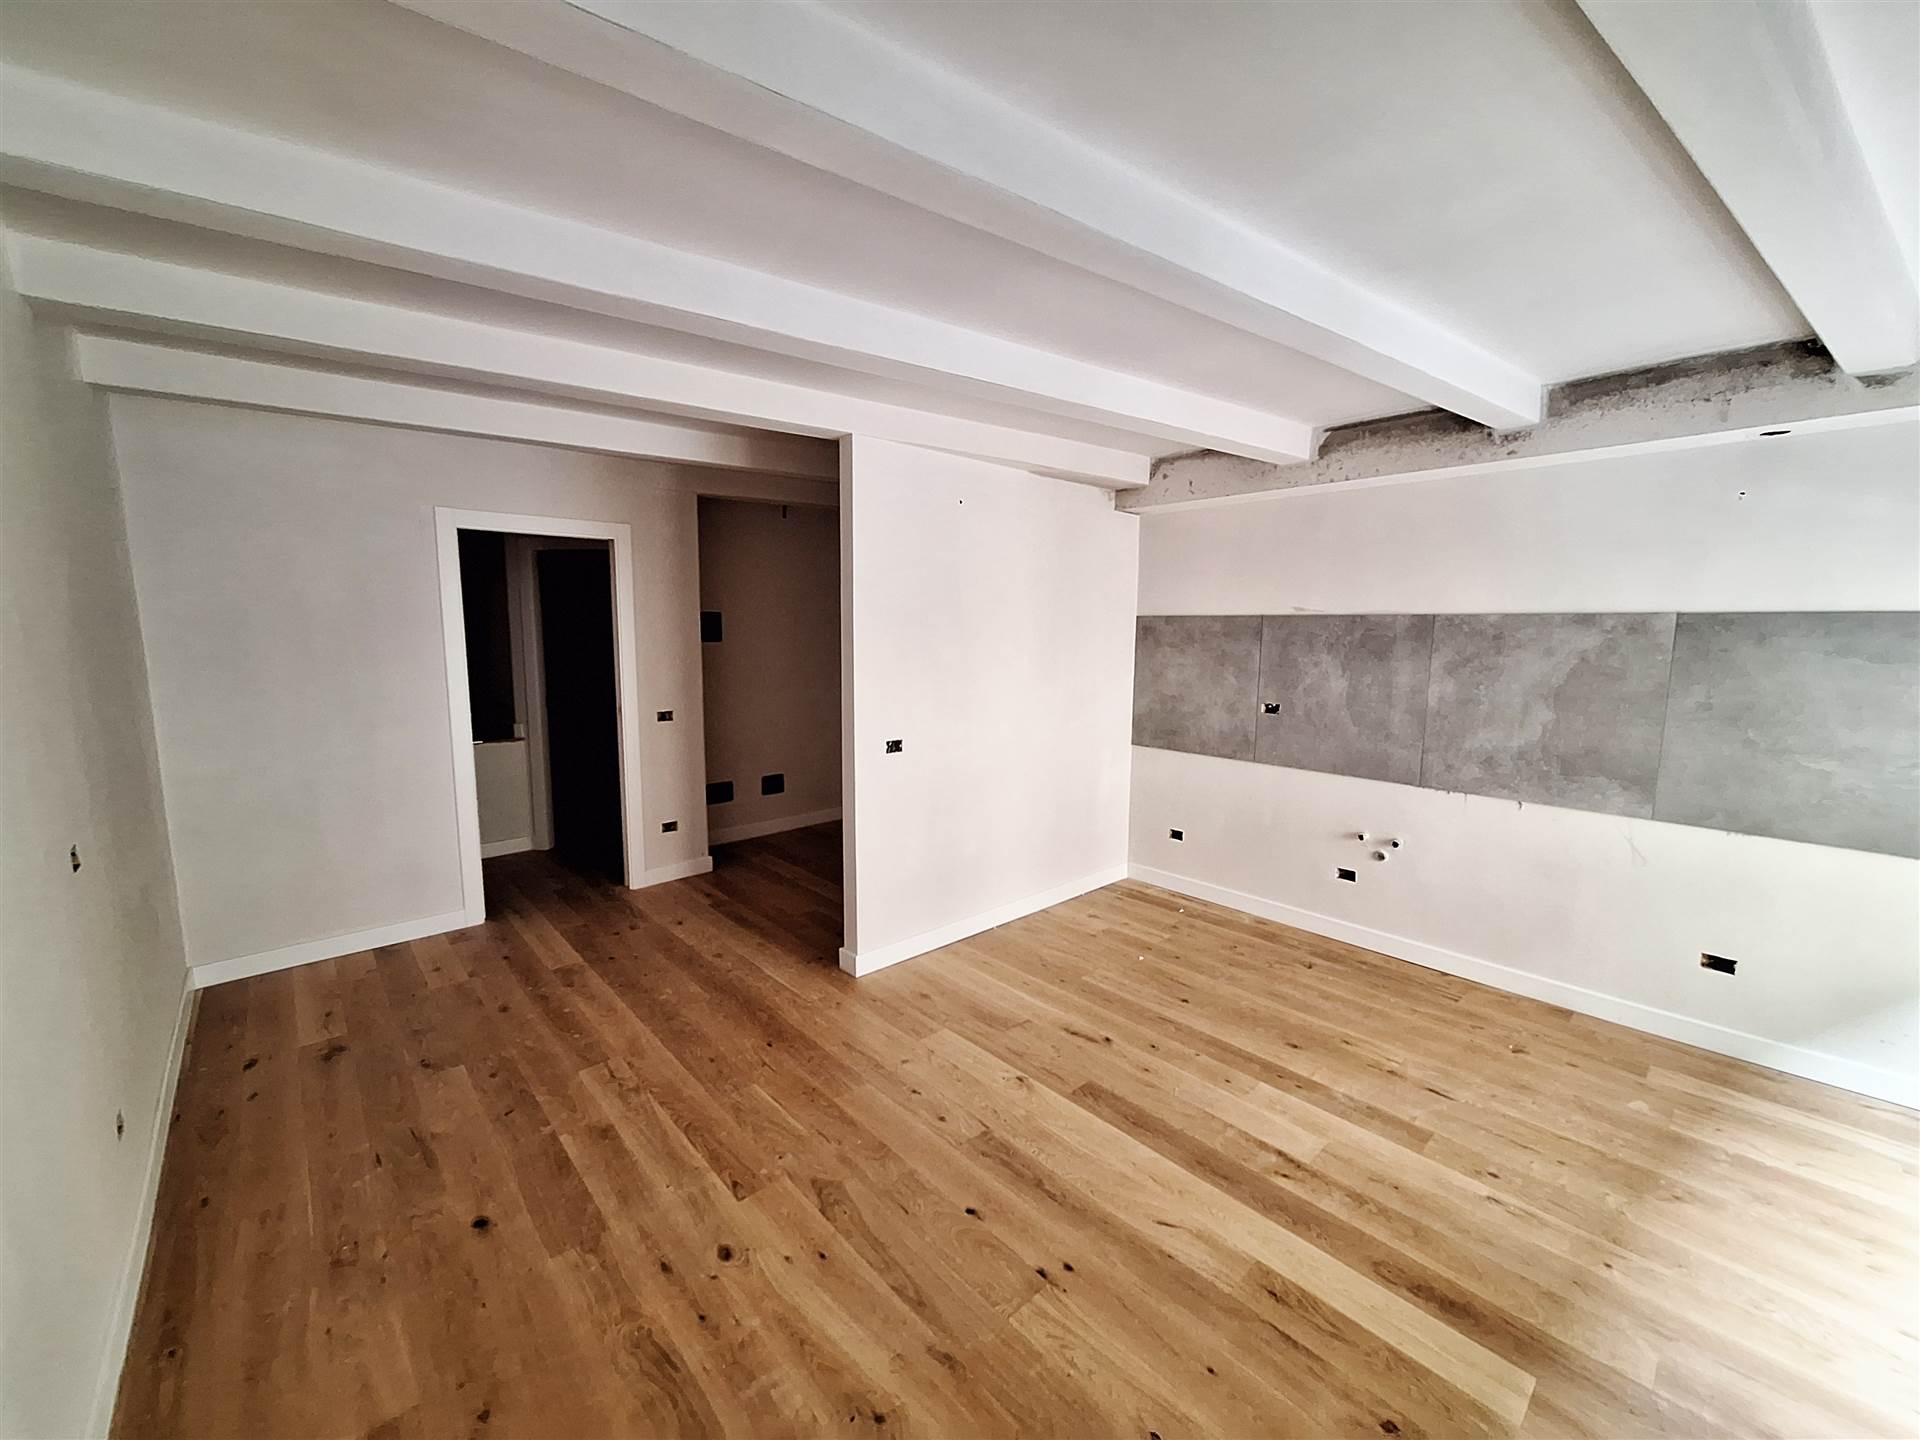 COMUNALE, FIRENZE, Apartment for sale of 90 Sq. mt., Restored, Heating Individual heating system, Energetic class: G, Epi: 276 kwh/m2 year, placed at 